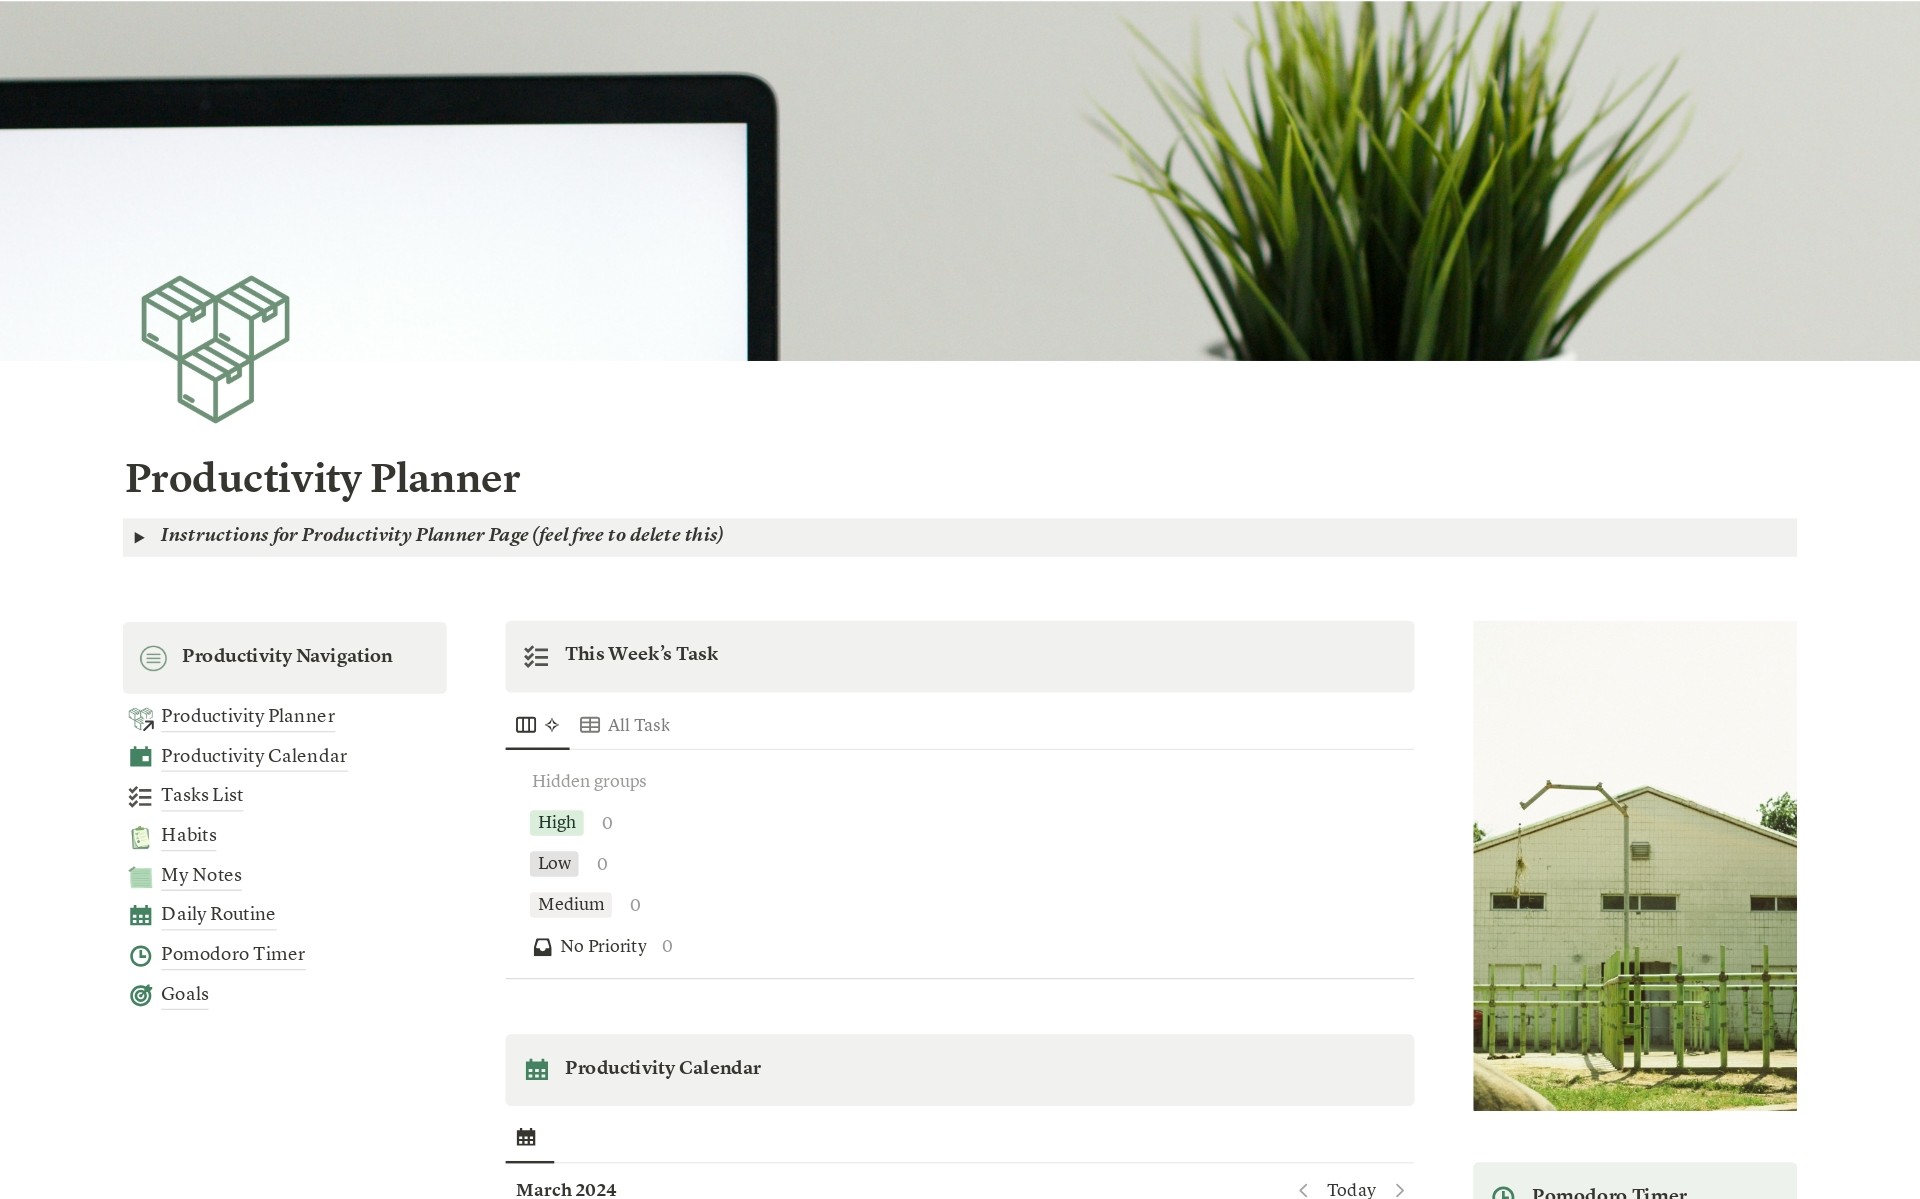 Streamline your productivity with this simple Notion planner. Organize tasks, set goals, track progress, and manage deadlines all in one intuitive and customizable digital workspace.